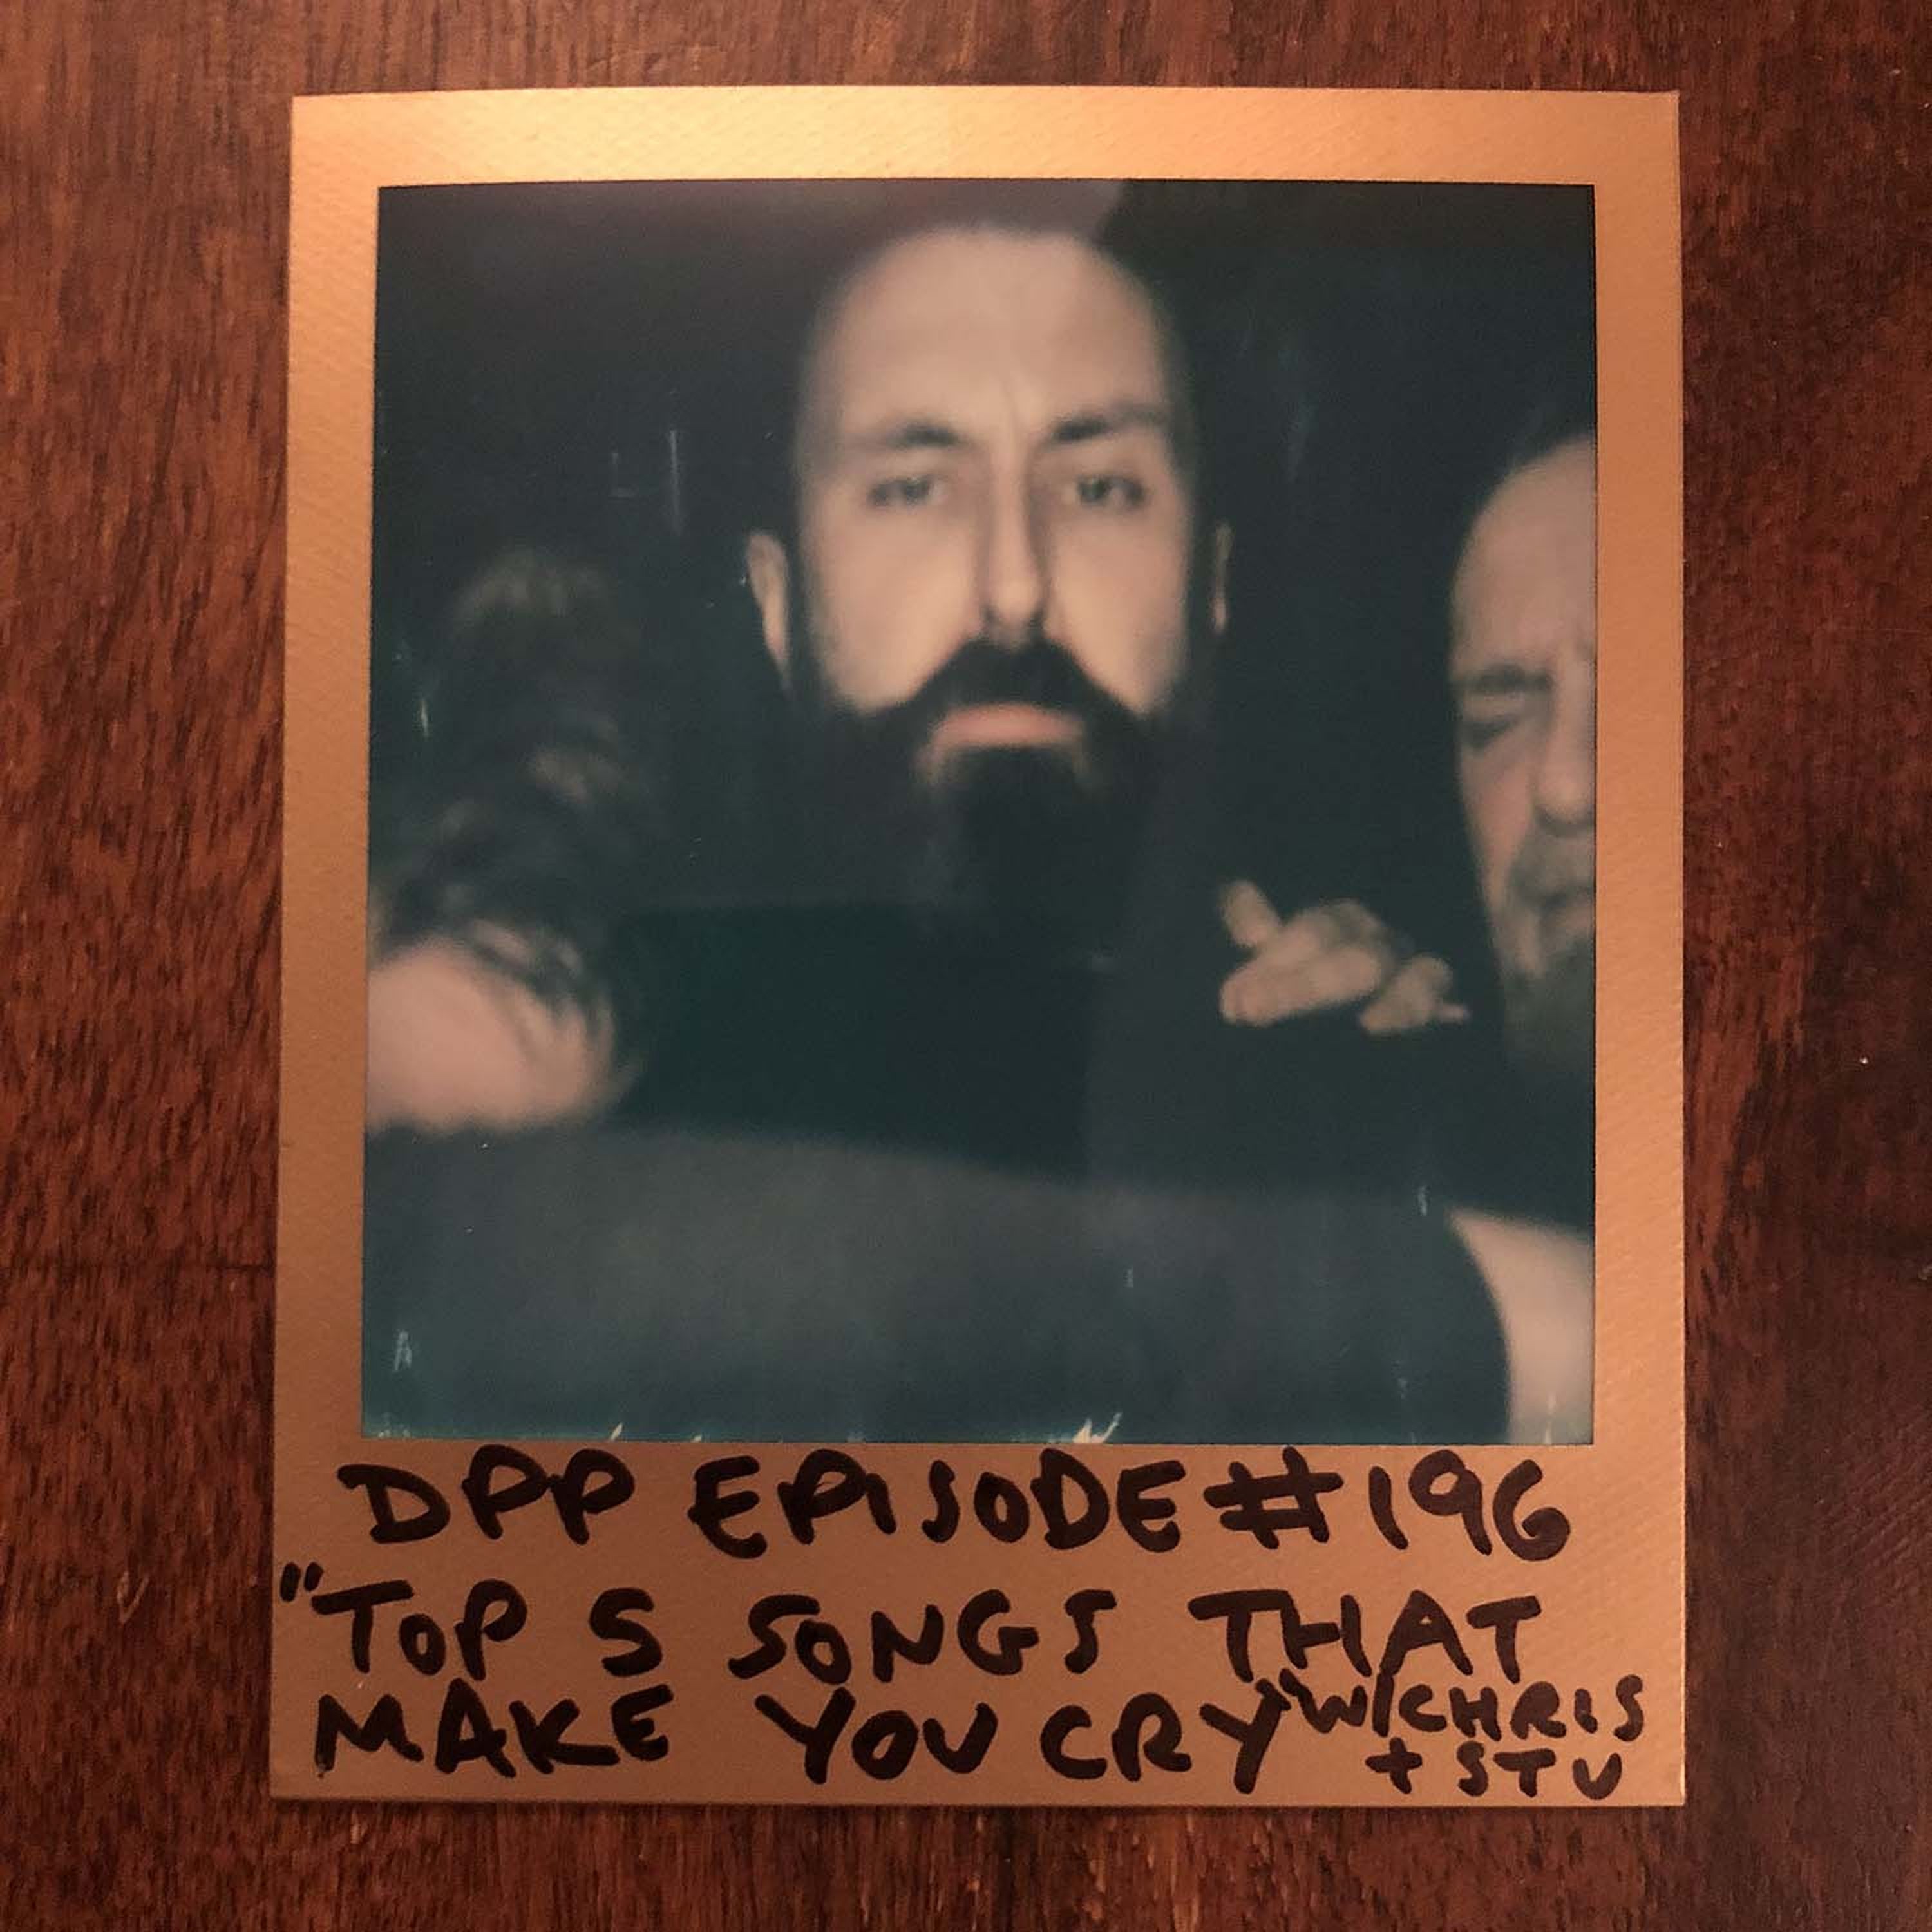 cover art for Top 5 Songs That Make You Cry w/Chris & Stu (part 1 of 2) - Distraction Pieces Podcast with Scroobius Pip #196